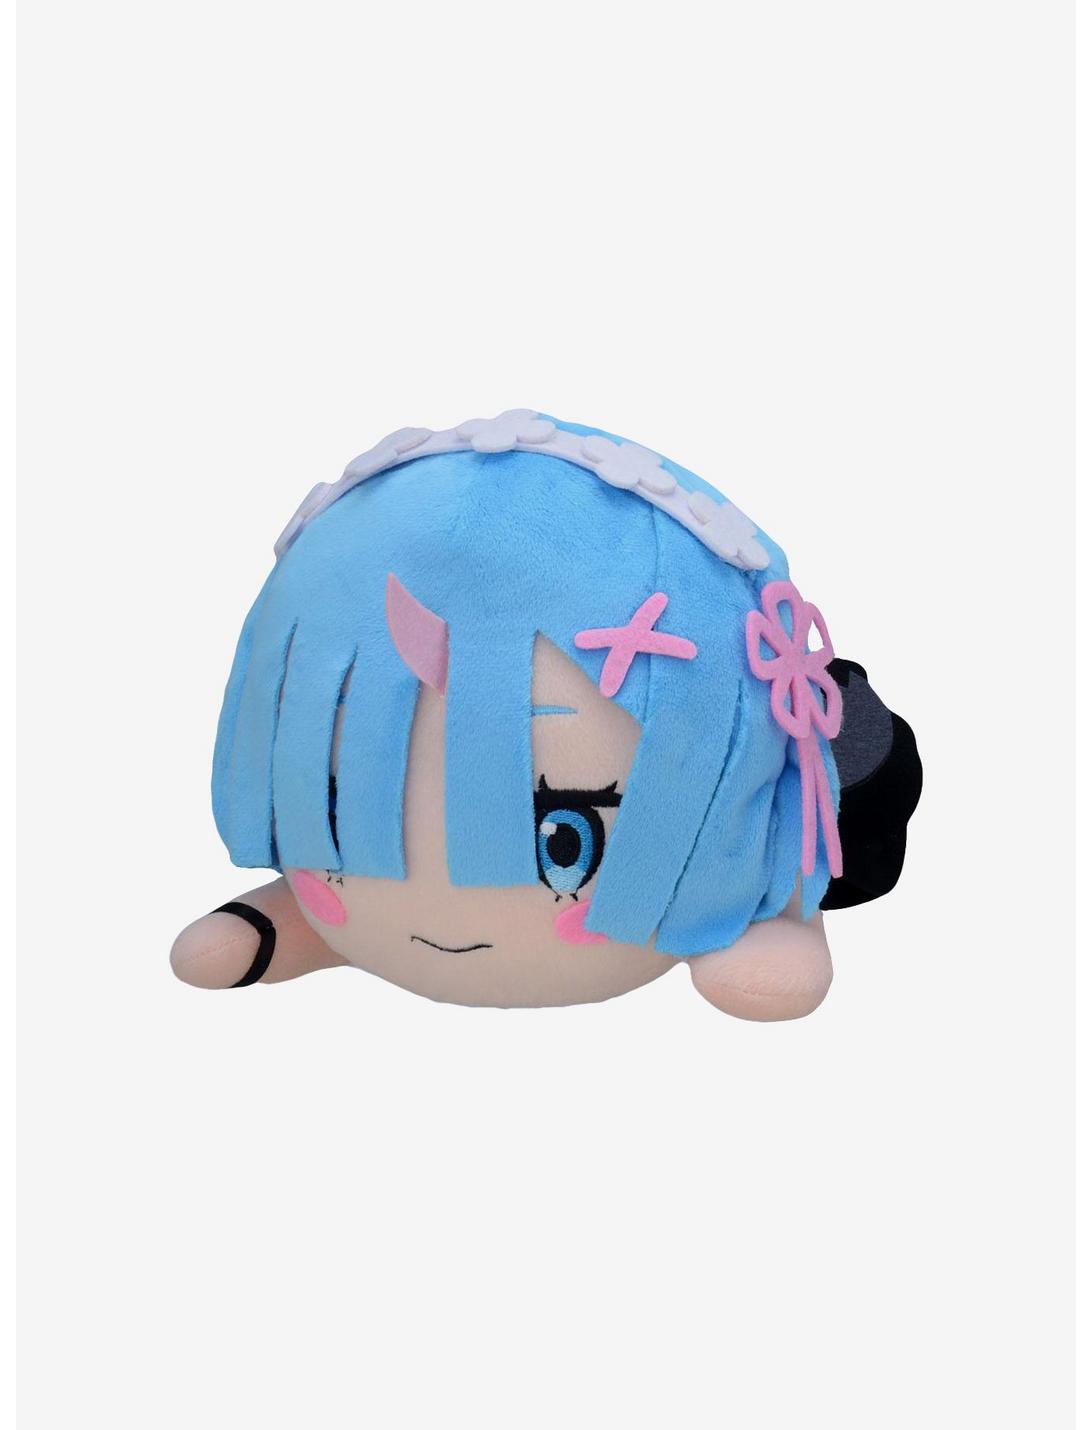 Re:Zero - Starting Life in Another World Rem Lying Down 12 Inch Plush, , hi-res